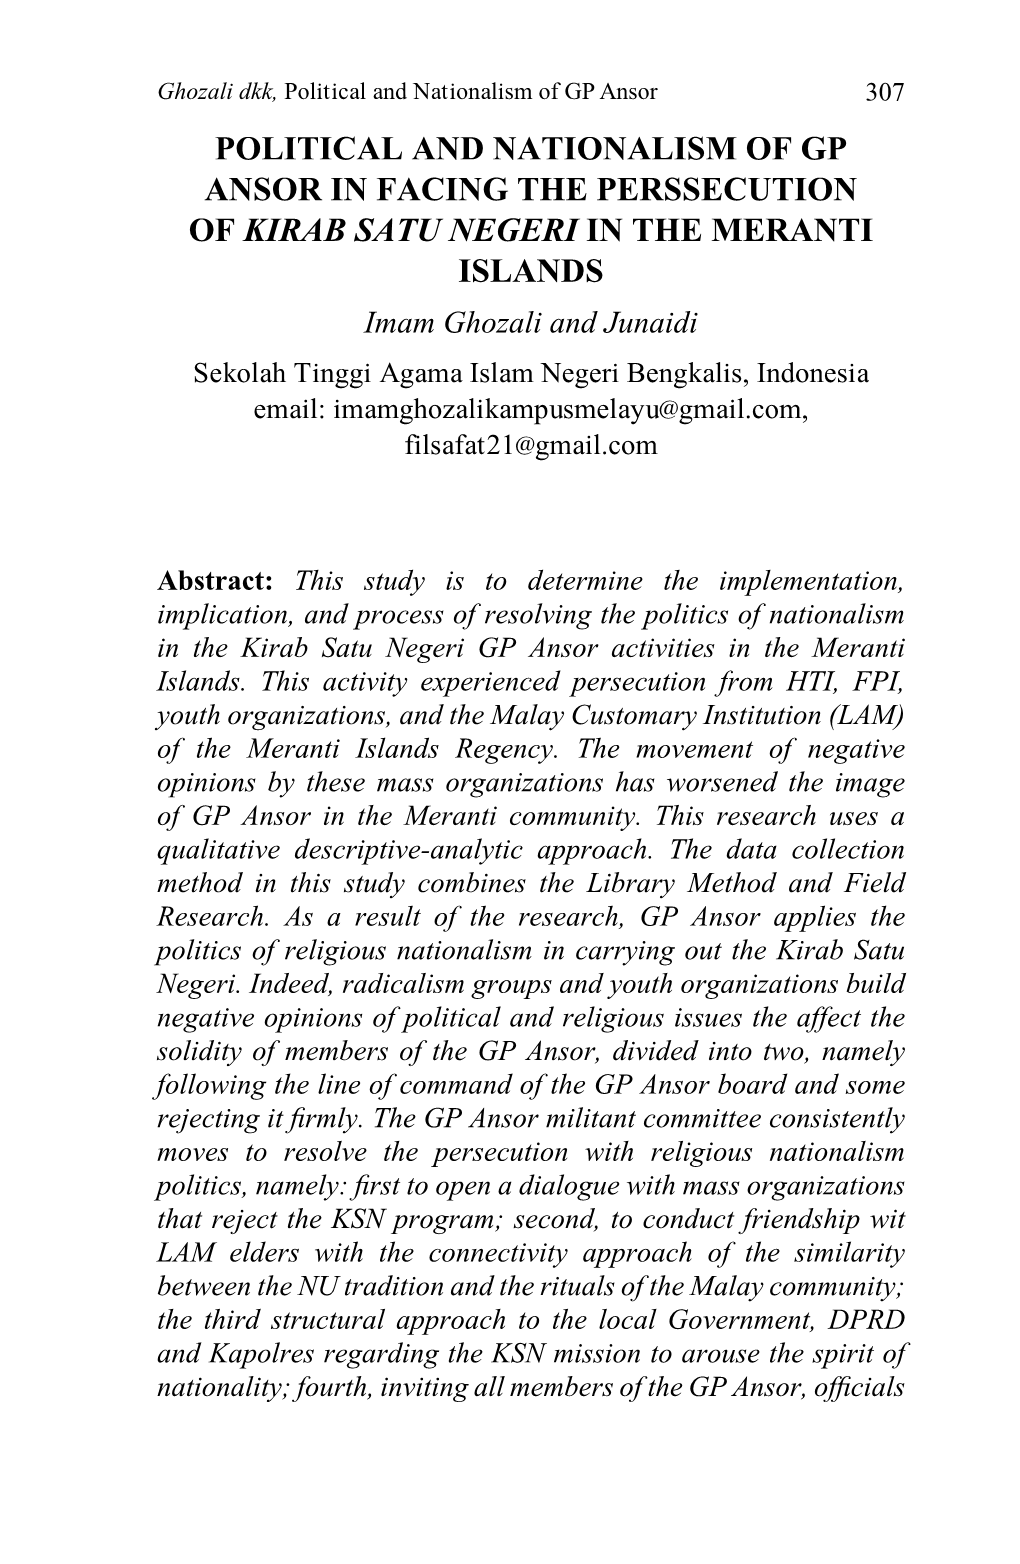 Political and Nationalism of Gp Ansor in Facing The